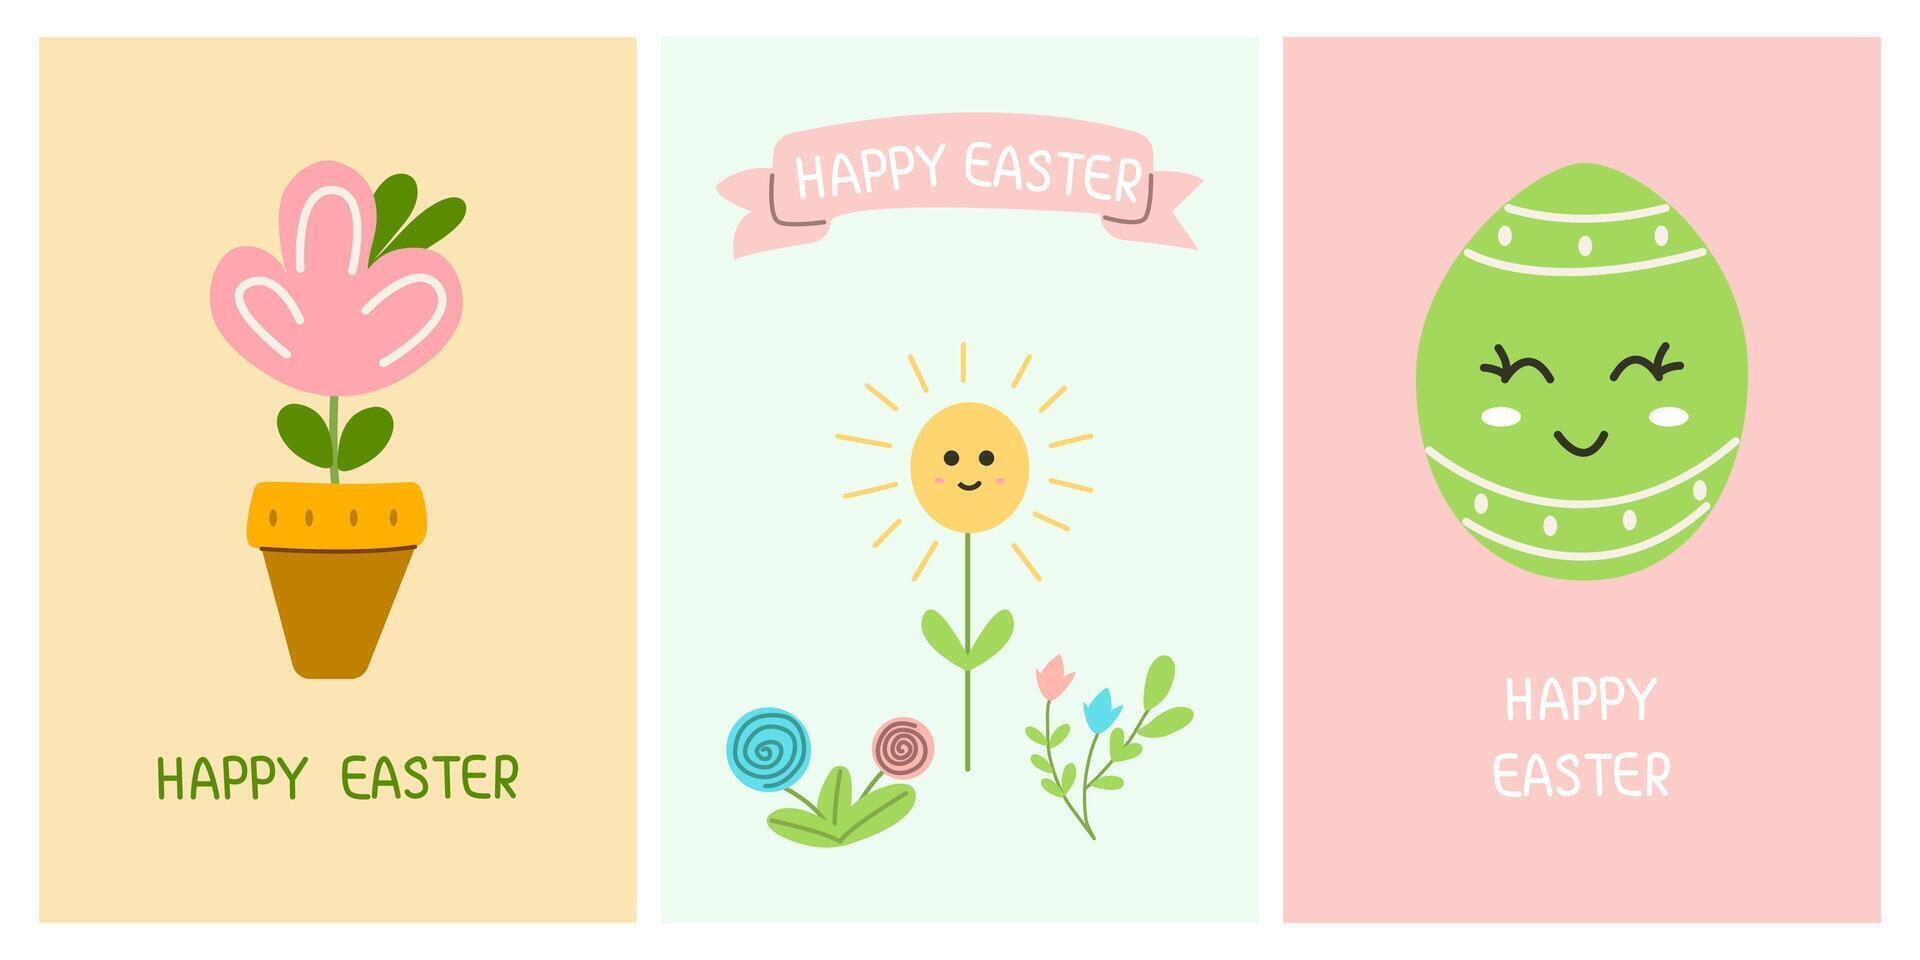 Greeting cute cards for the Easter holiday. Egg, spring flowers. For posters, cards, scrapbooking, stickers vector